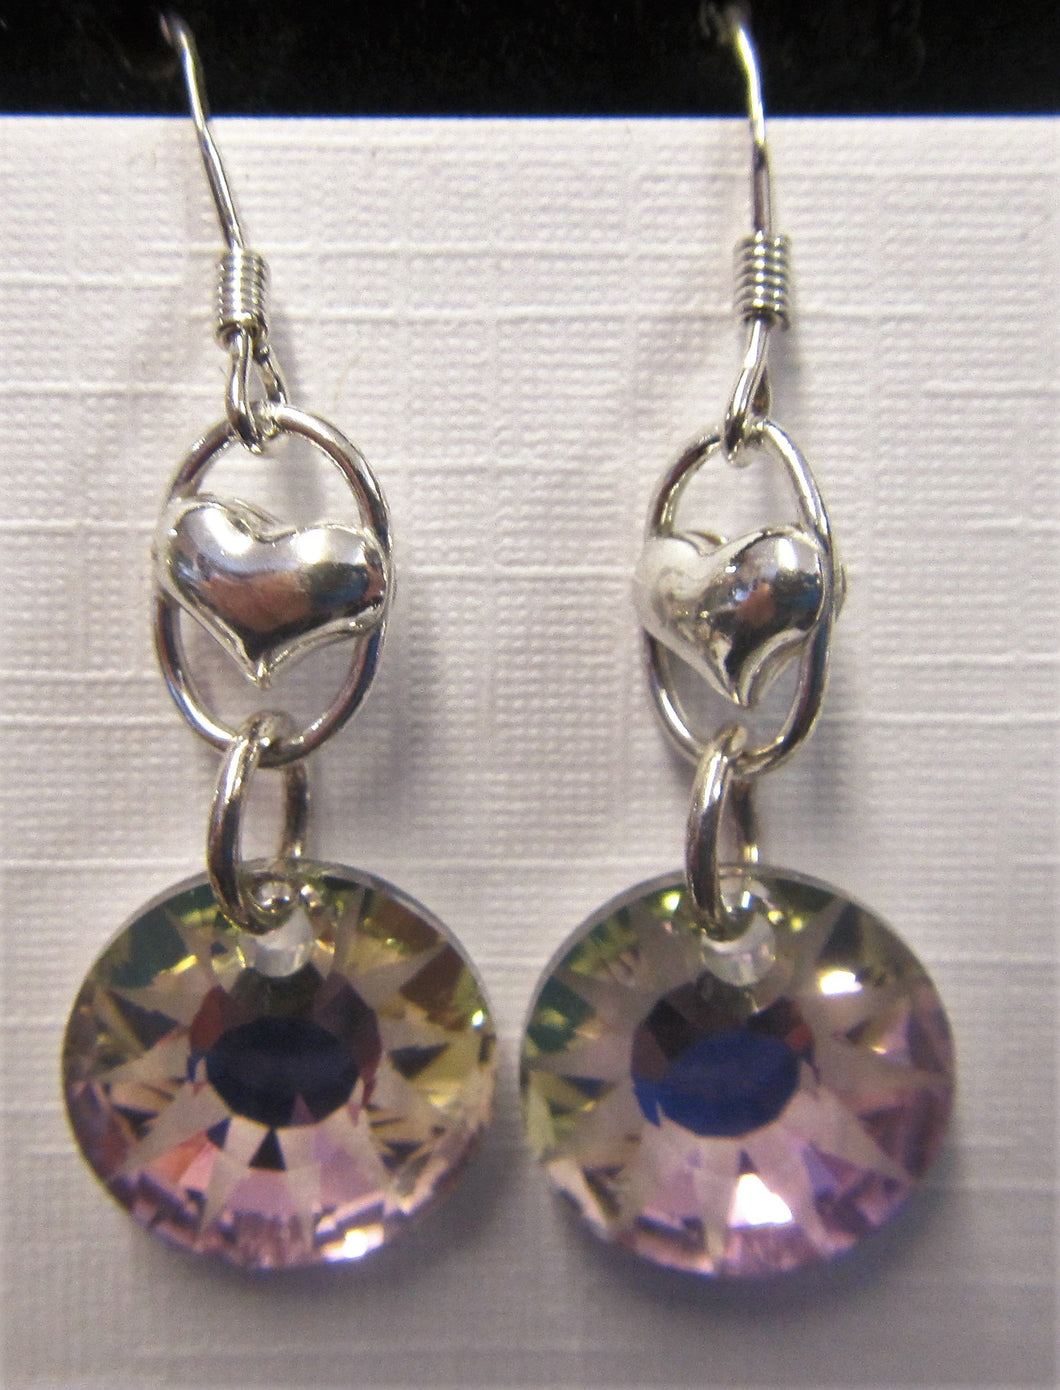 Handcrafted sterling silver heart and swarovski crystal earrings